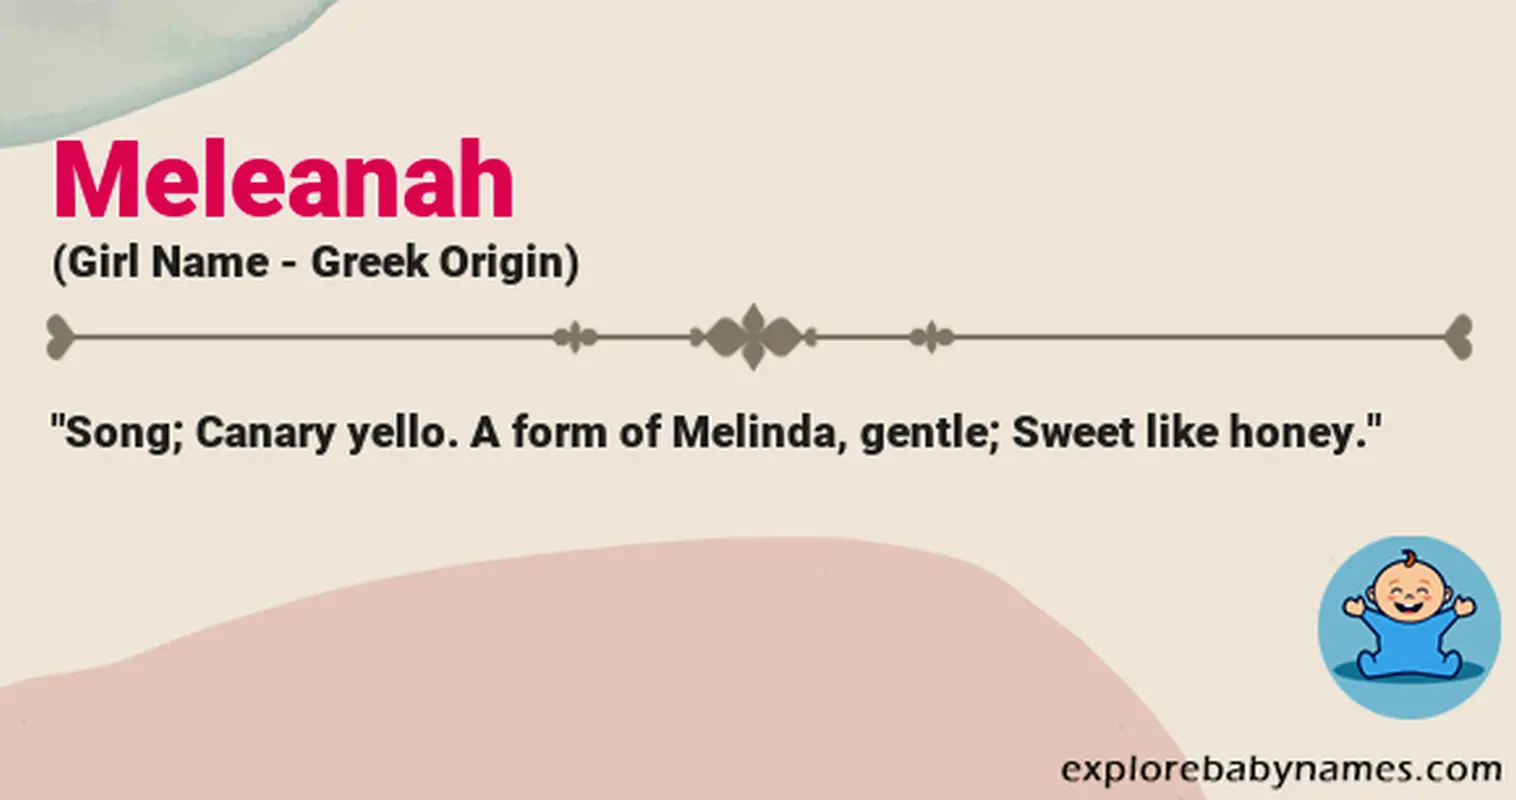 Meaning of Meleanah